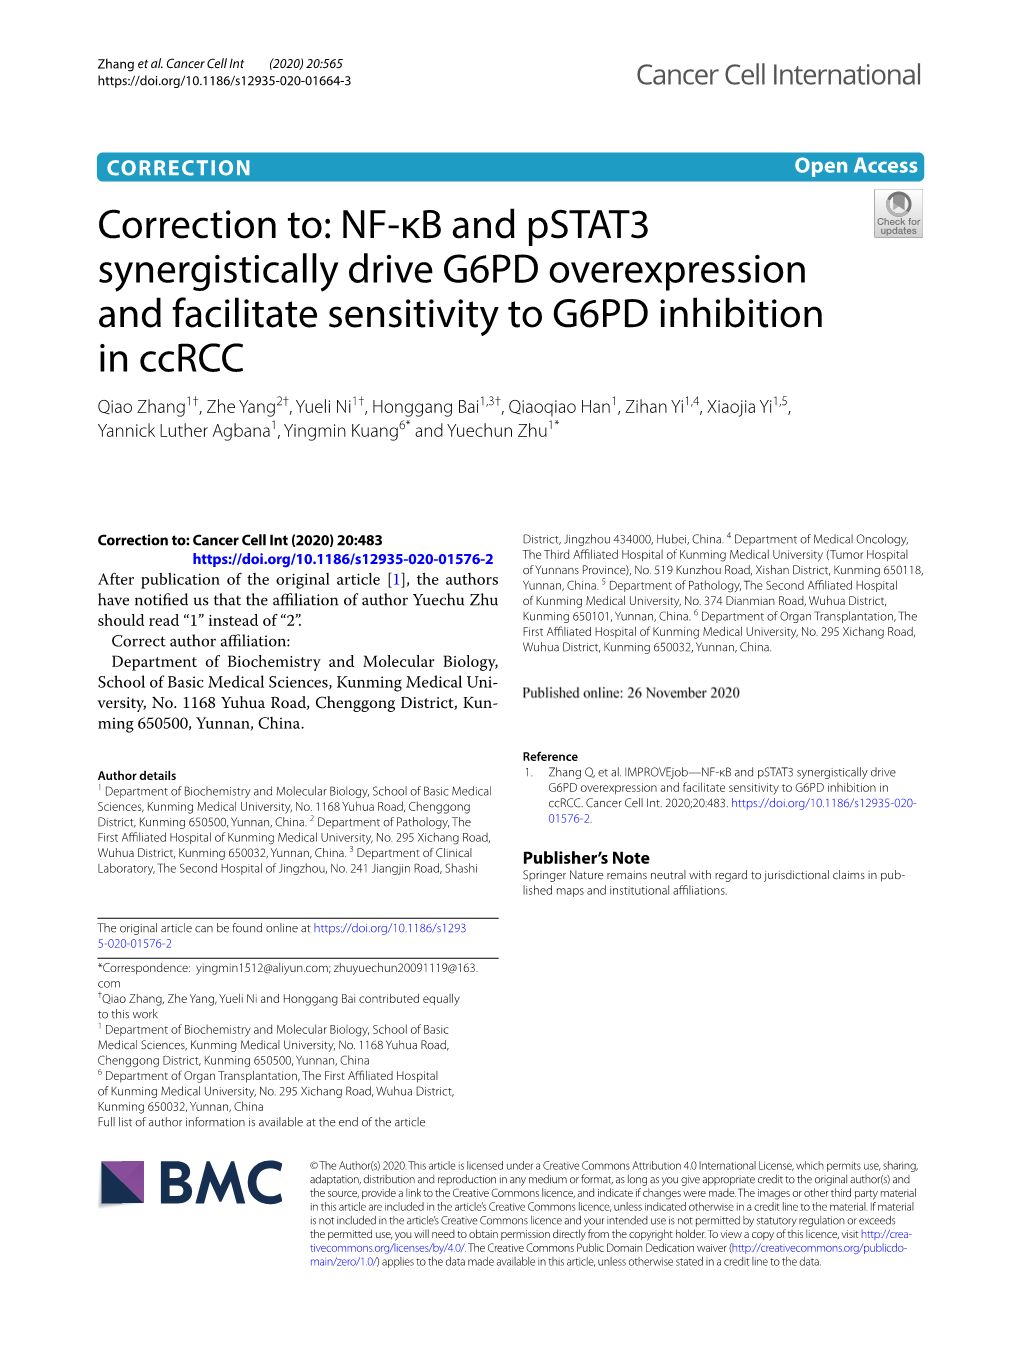 Correction To: NF-Κb and Pstat3 Synergistically Drive G6PD